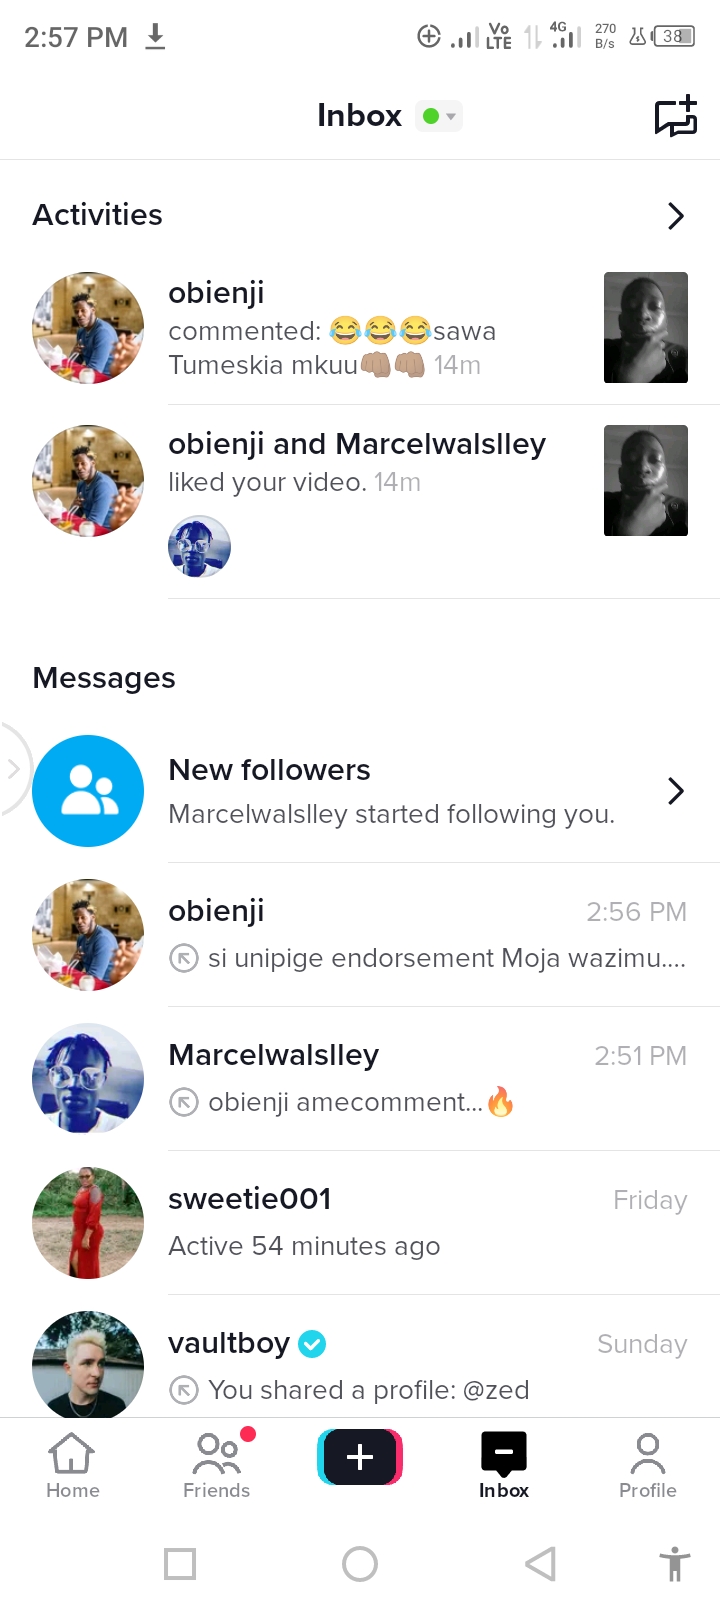 2:57PM @ alge ND aCE

Inbox @-

Activities

   

obienji and Marcelwalslley
liked your video.

0

&gt;
obienji \
commented: 2&amp;3 &amp;isawa J
Tumeskia mkuu @) @

 

&amp;

Messages

New followers
Marcelwalslley started following you.

obienji

si unipige endorsement Moja wazimu...

Marcelwalslley
obienjiamecomment... a

sweetie001

 

Active 54 minutes ago

p vaultboy ©
You shared a profile: @zed

= @ | 2

Home Friends Inbox Profile